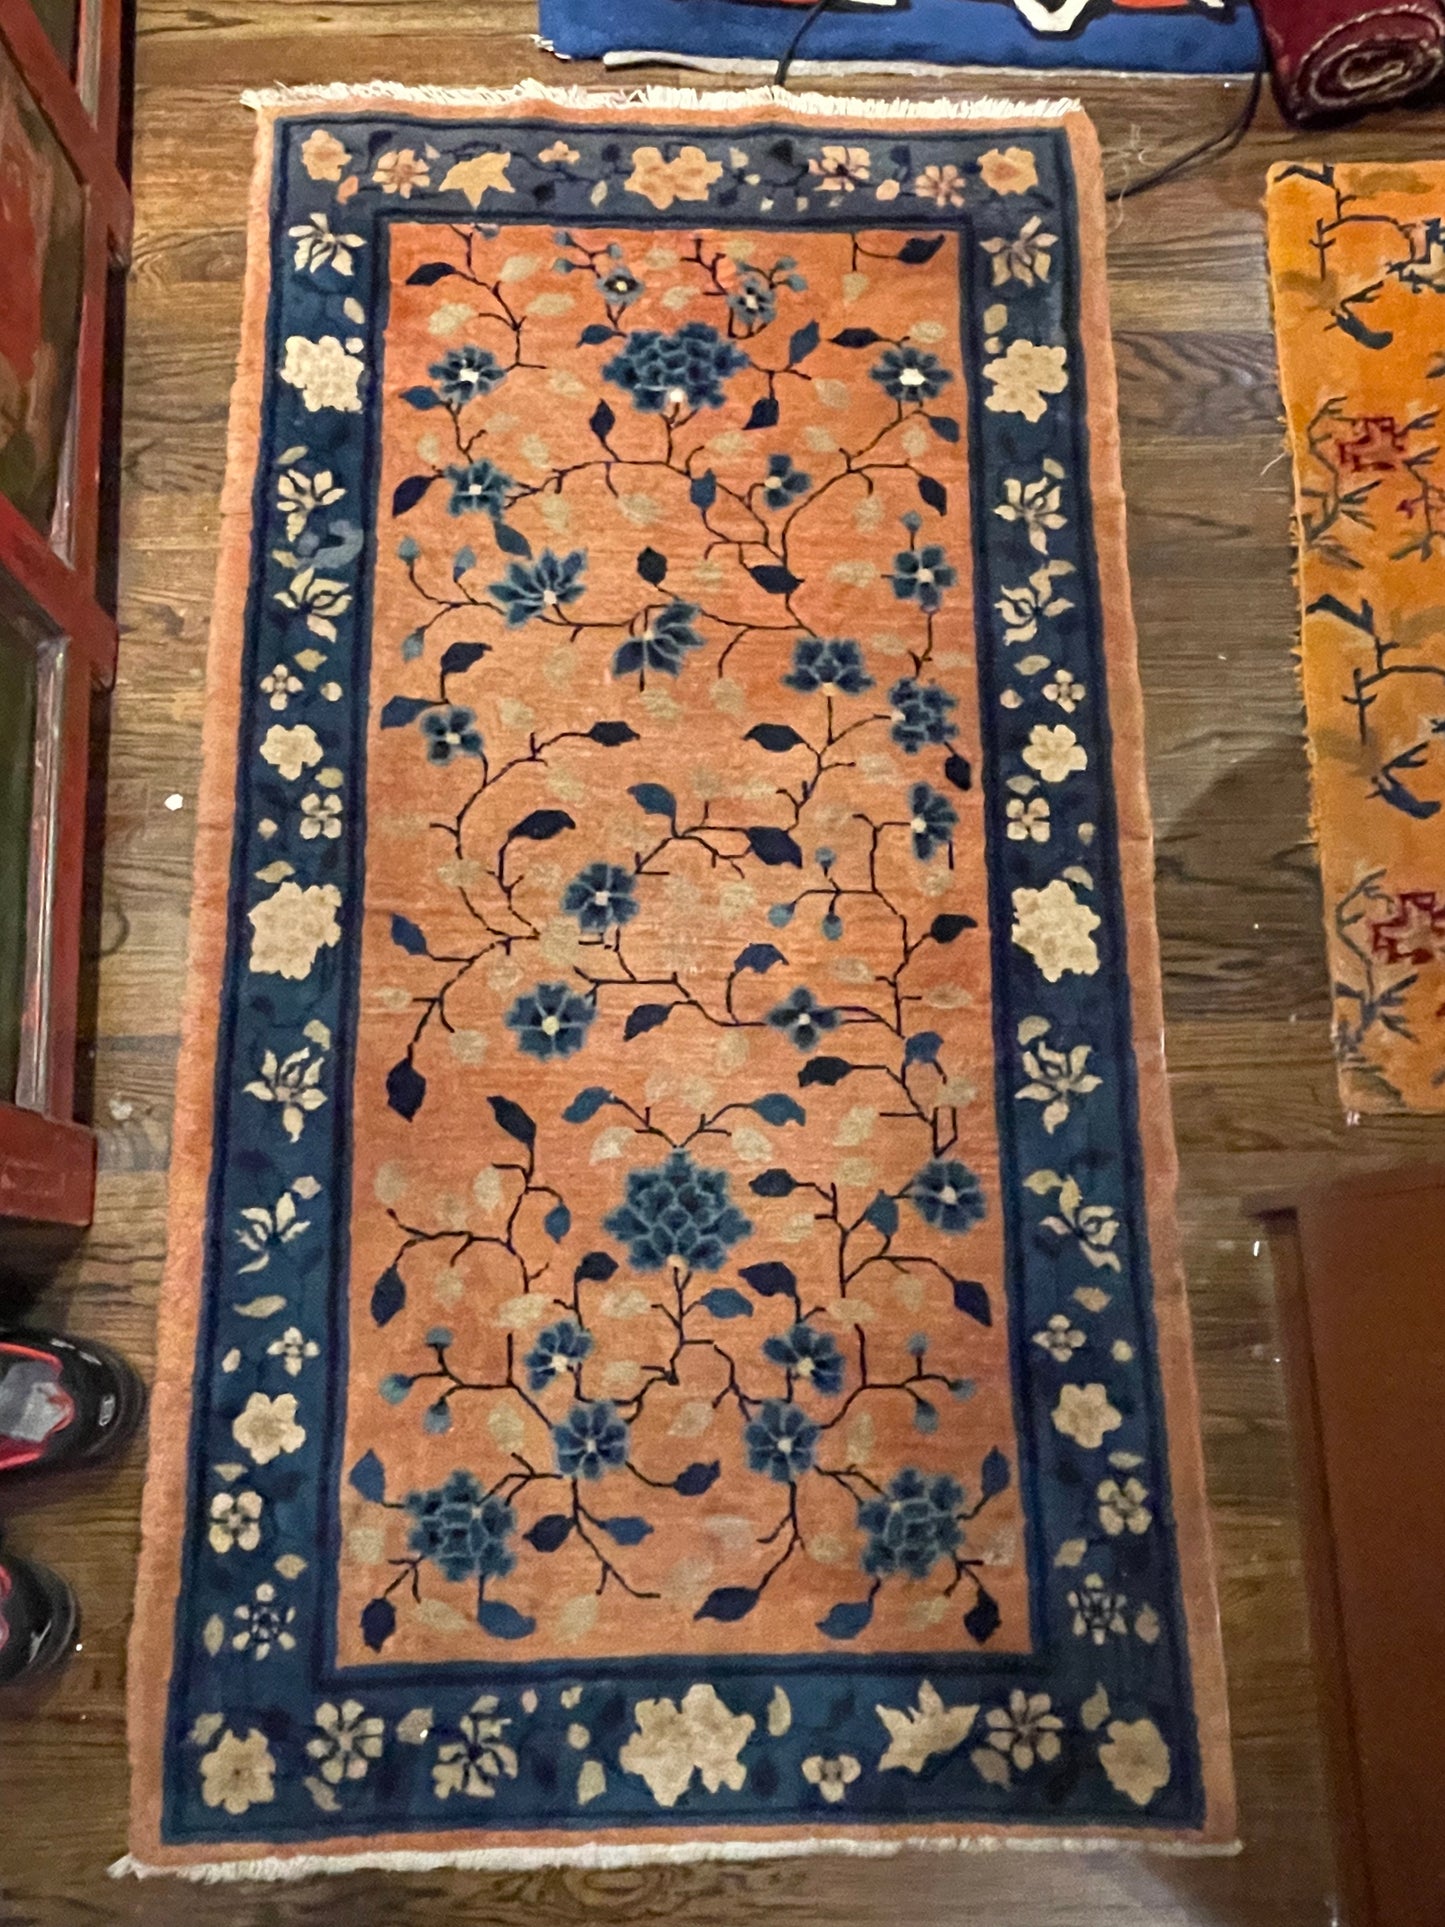 An antique handwoven Chinese rug